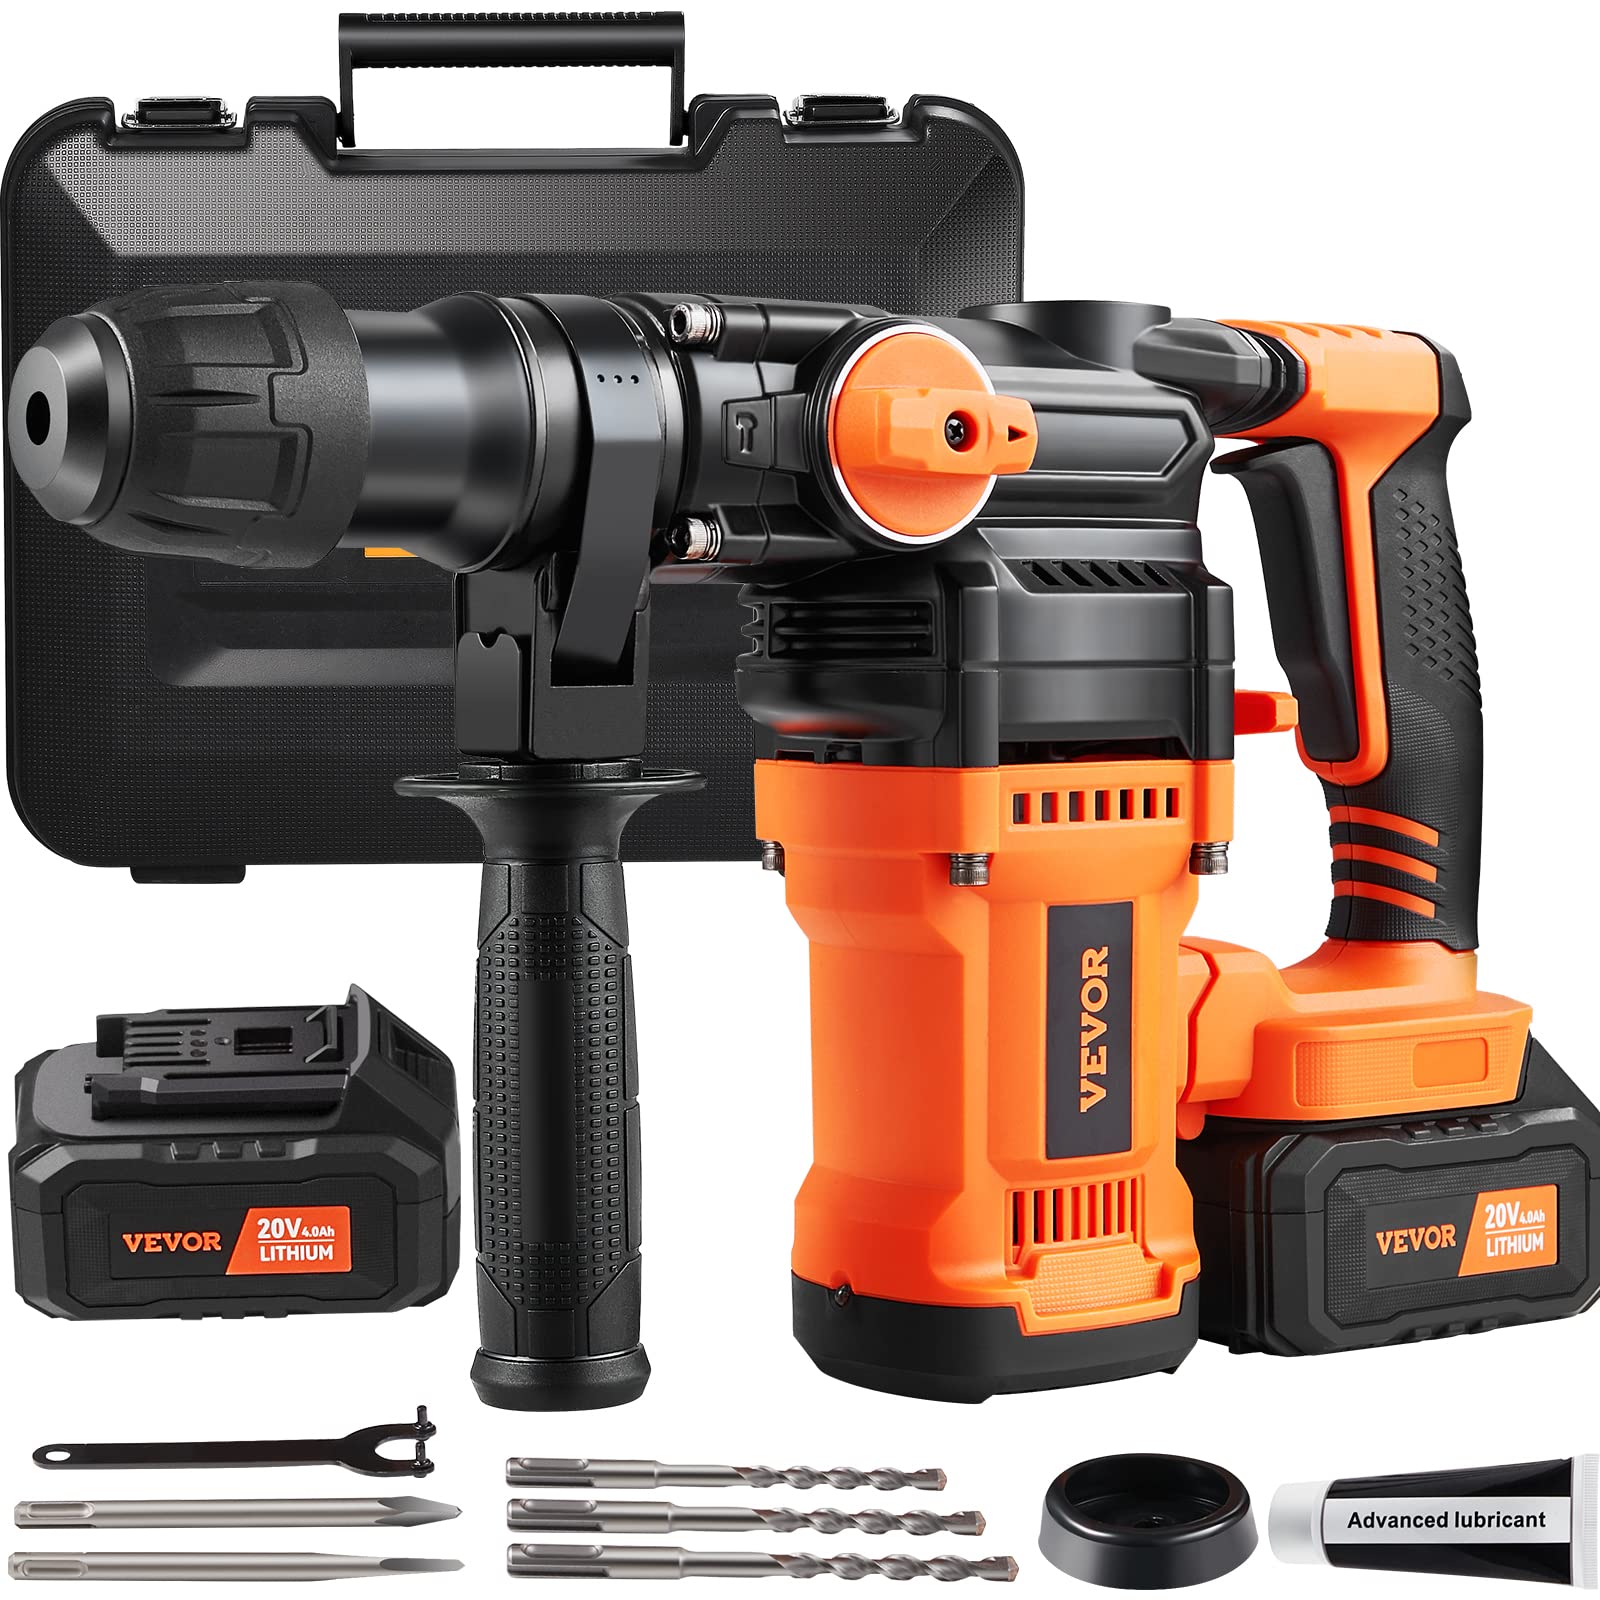 VEVOR 1 Inch SDS-Plus Rotary Hammer Drill, 20V 32Amp Cordless Drills, 3 Functions Electric Demolition Hammer, Chipping Hammers w/Vibration Control & Safety Clutch, Power Tool For Concrete Complete Kit